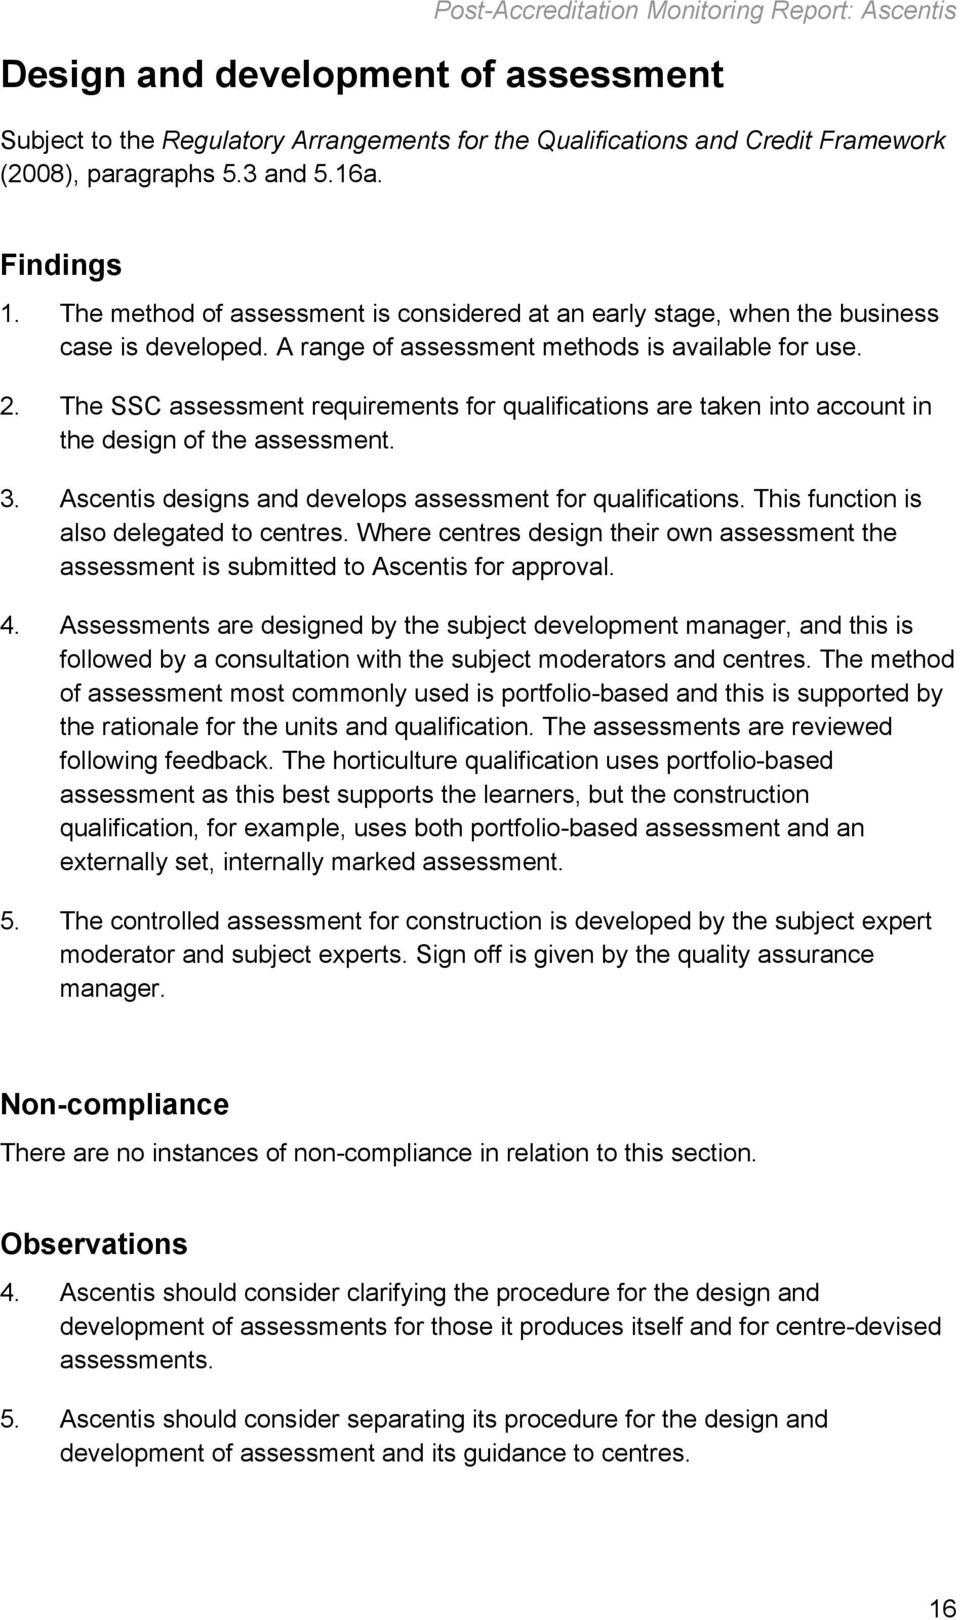 The SSC assessment requirements for qualifications are taken into account in the design of the assessment. 3. Ascentis designs and develops assessment for qualifications.